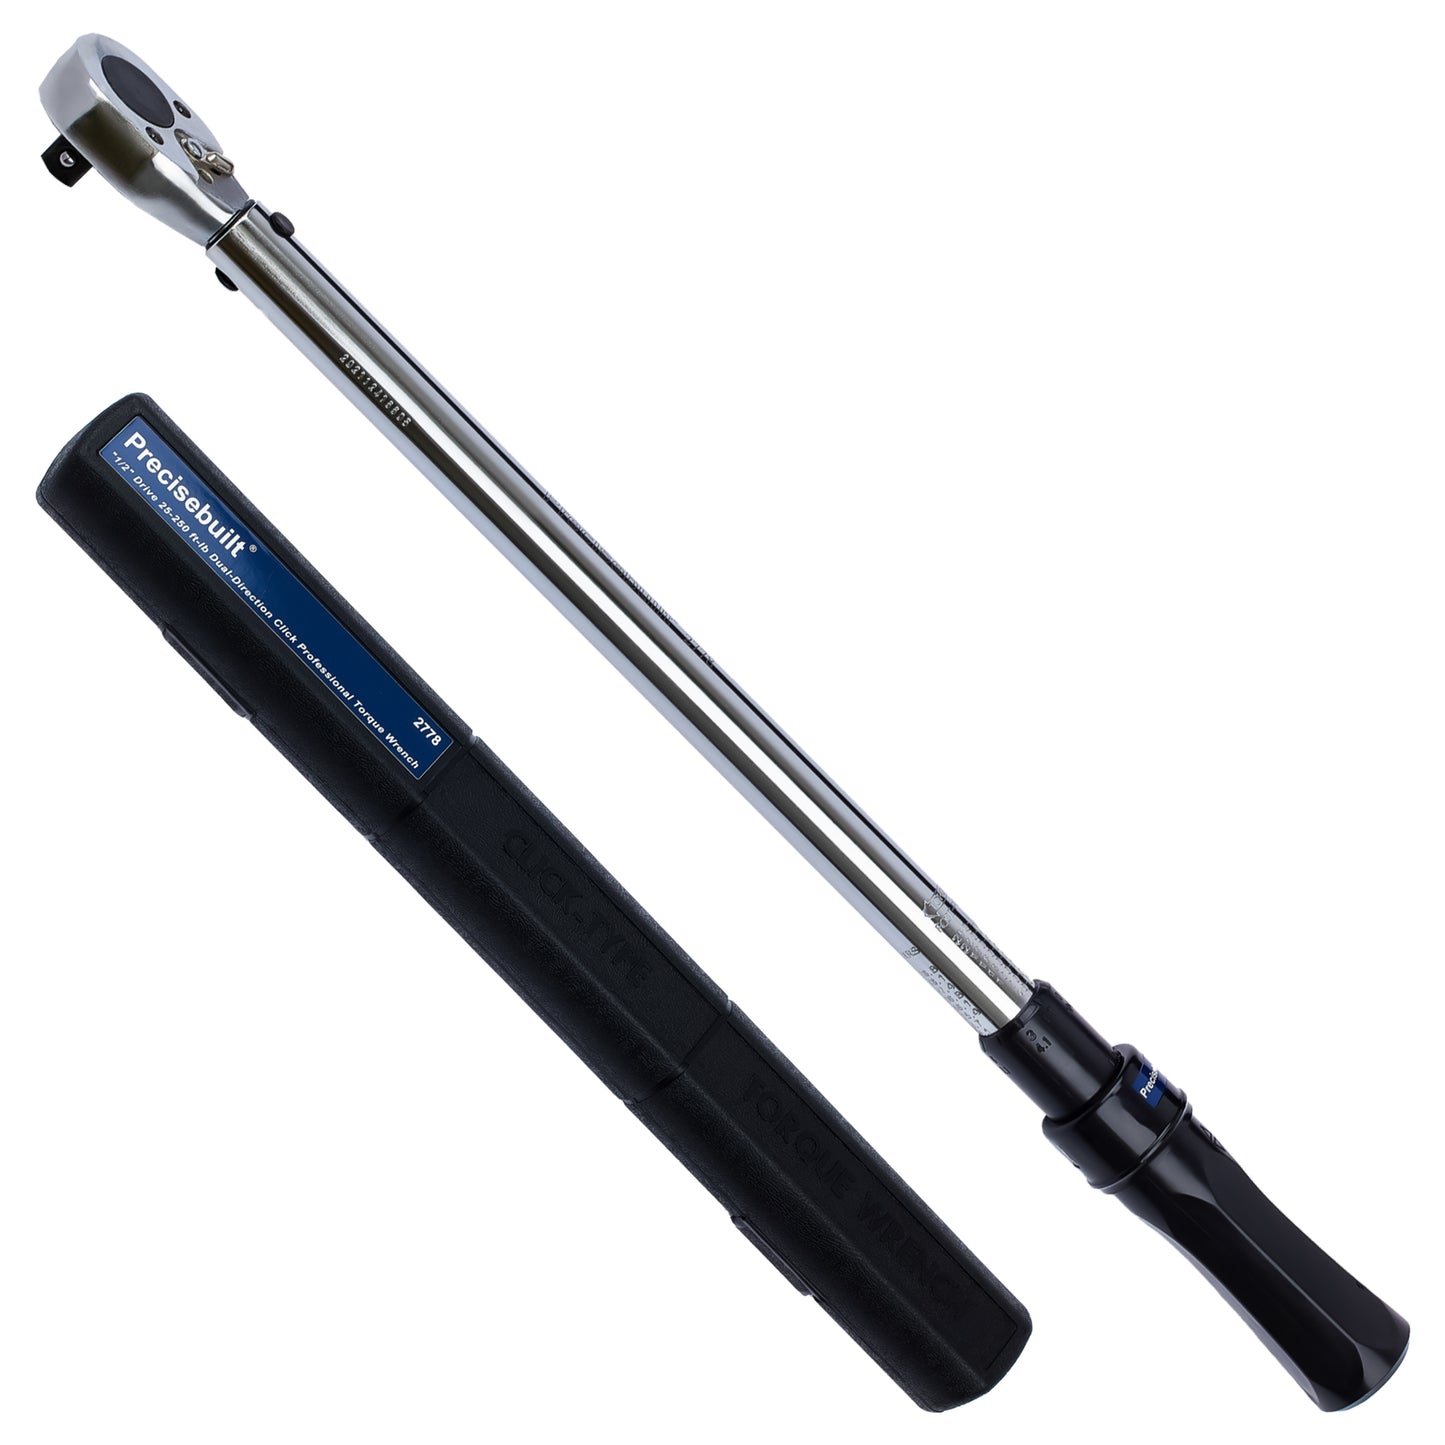 1/2" Drive 25-250 ft-lb (44.1-349.1 Nm) Dual-Direction Click Professional Torque Wrench